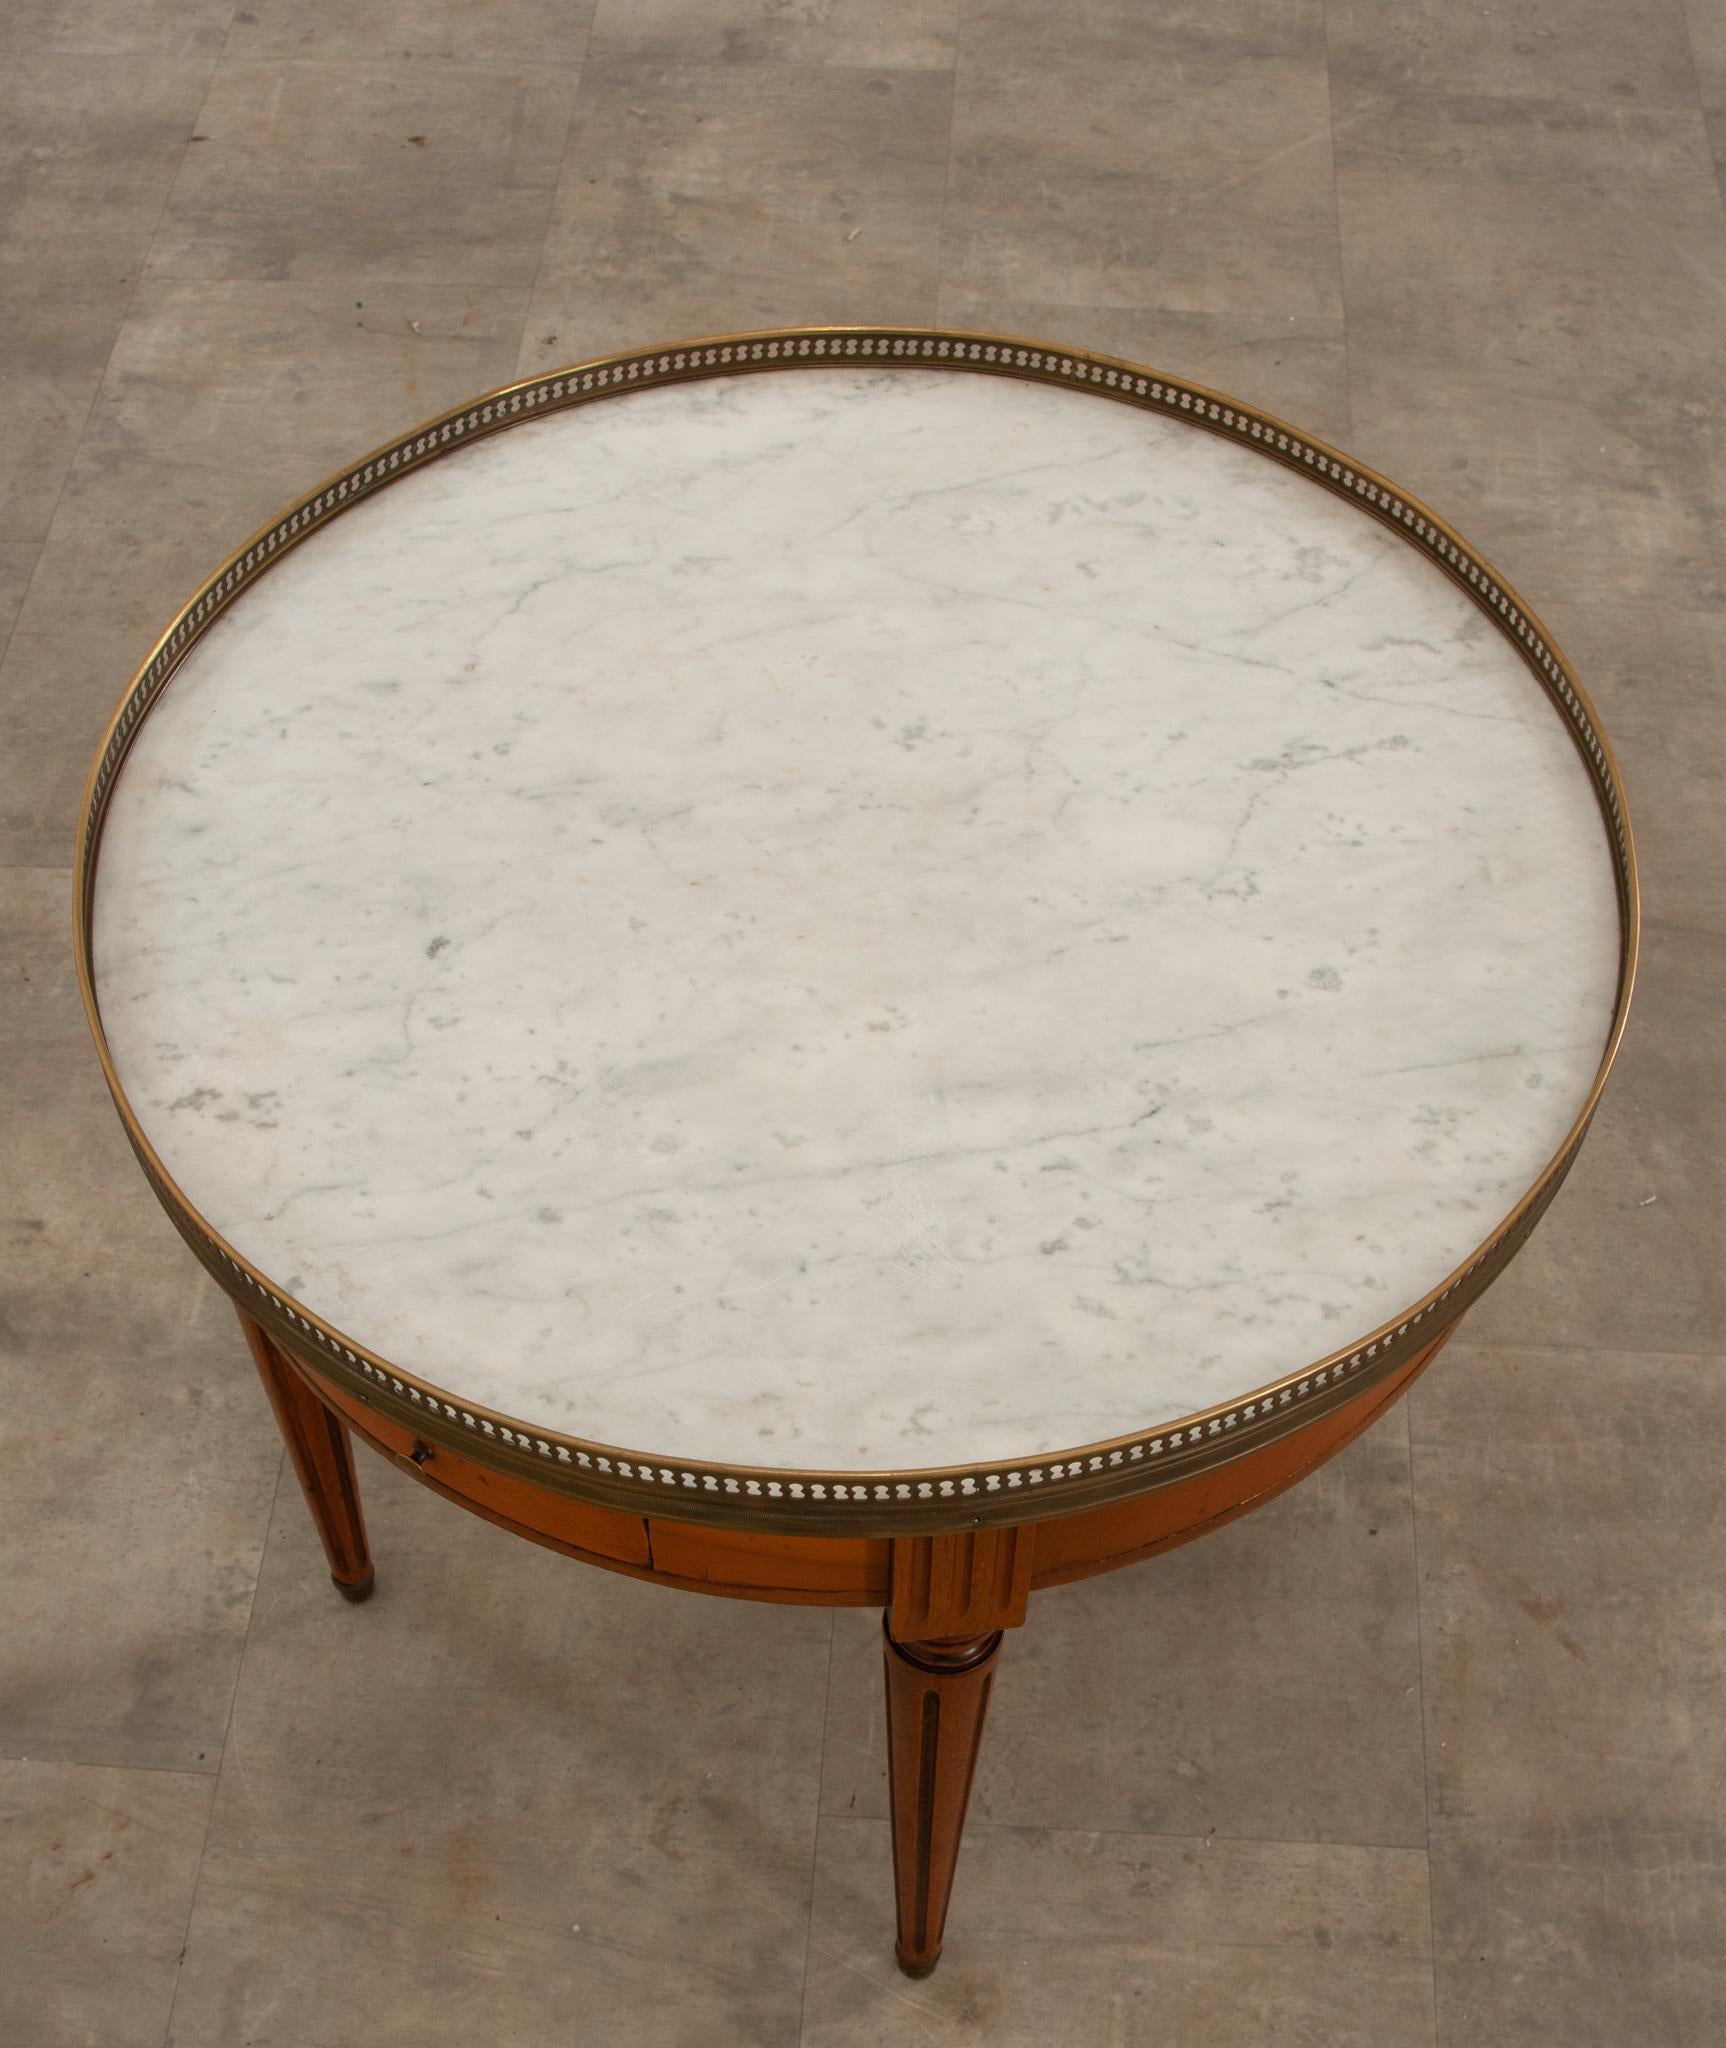 20th Century French Louis XVI Style Guéridon Bouillotte Table For Sale